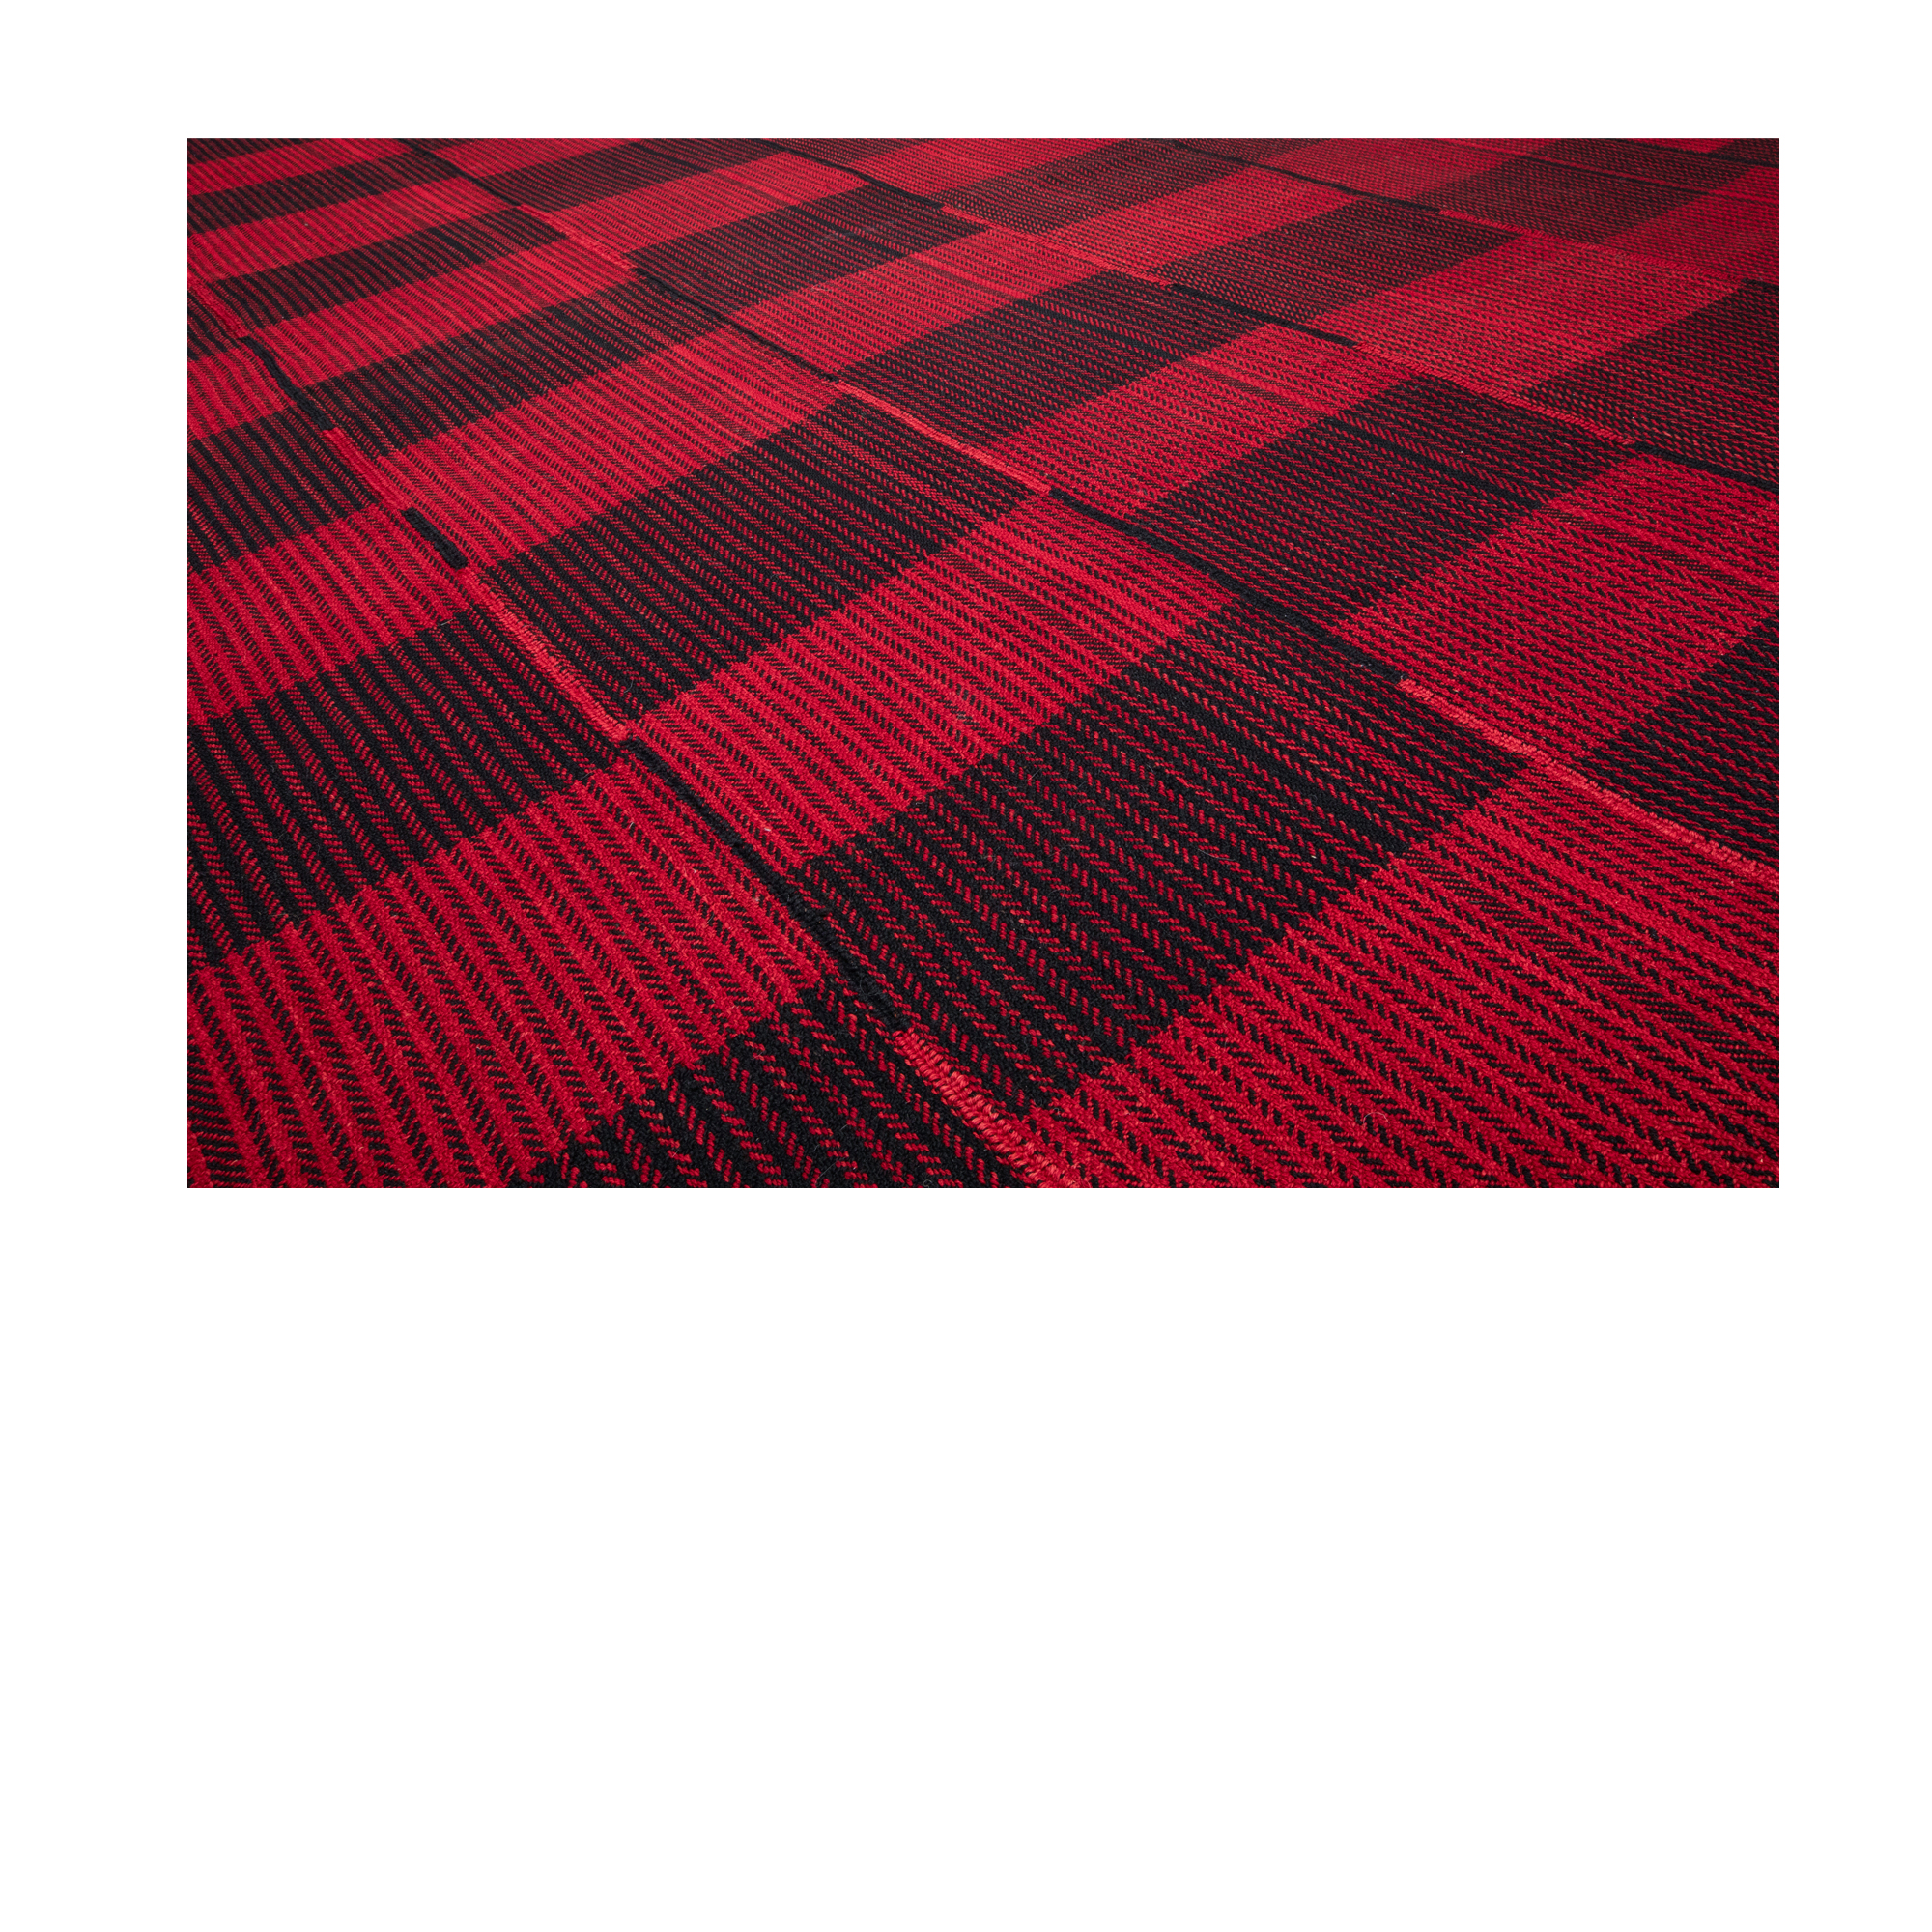 This Plaid rug is is hand-woven and made of 100% wool.